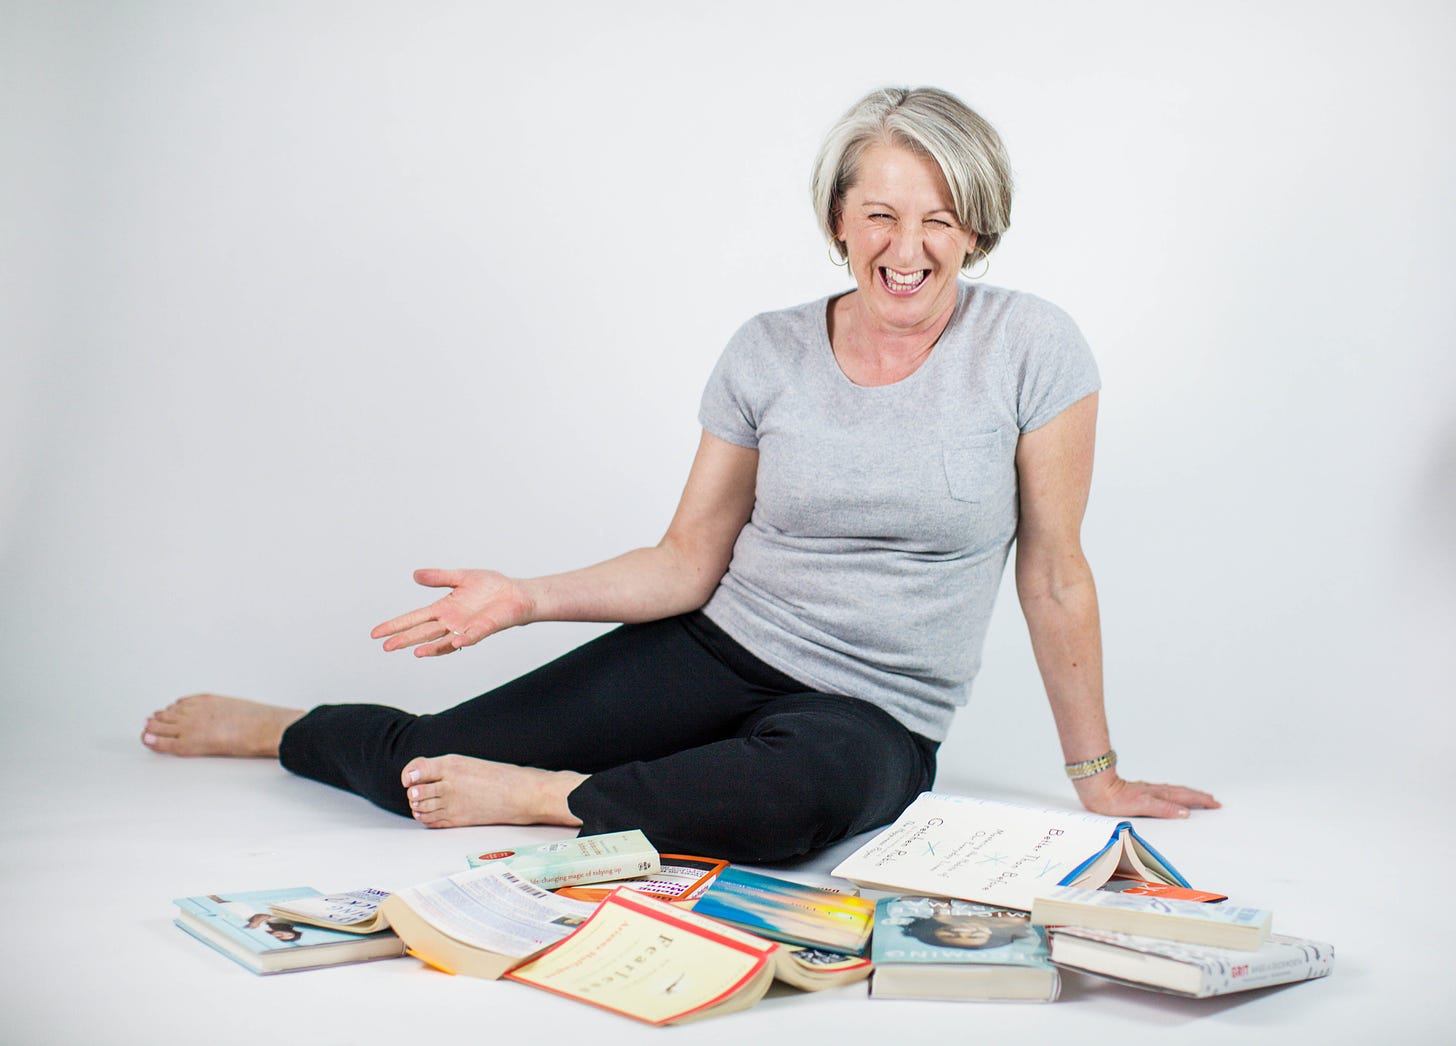 Author Catherine Palmer laughing as she sits amidst a pile of self-help books